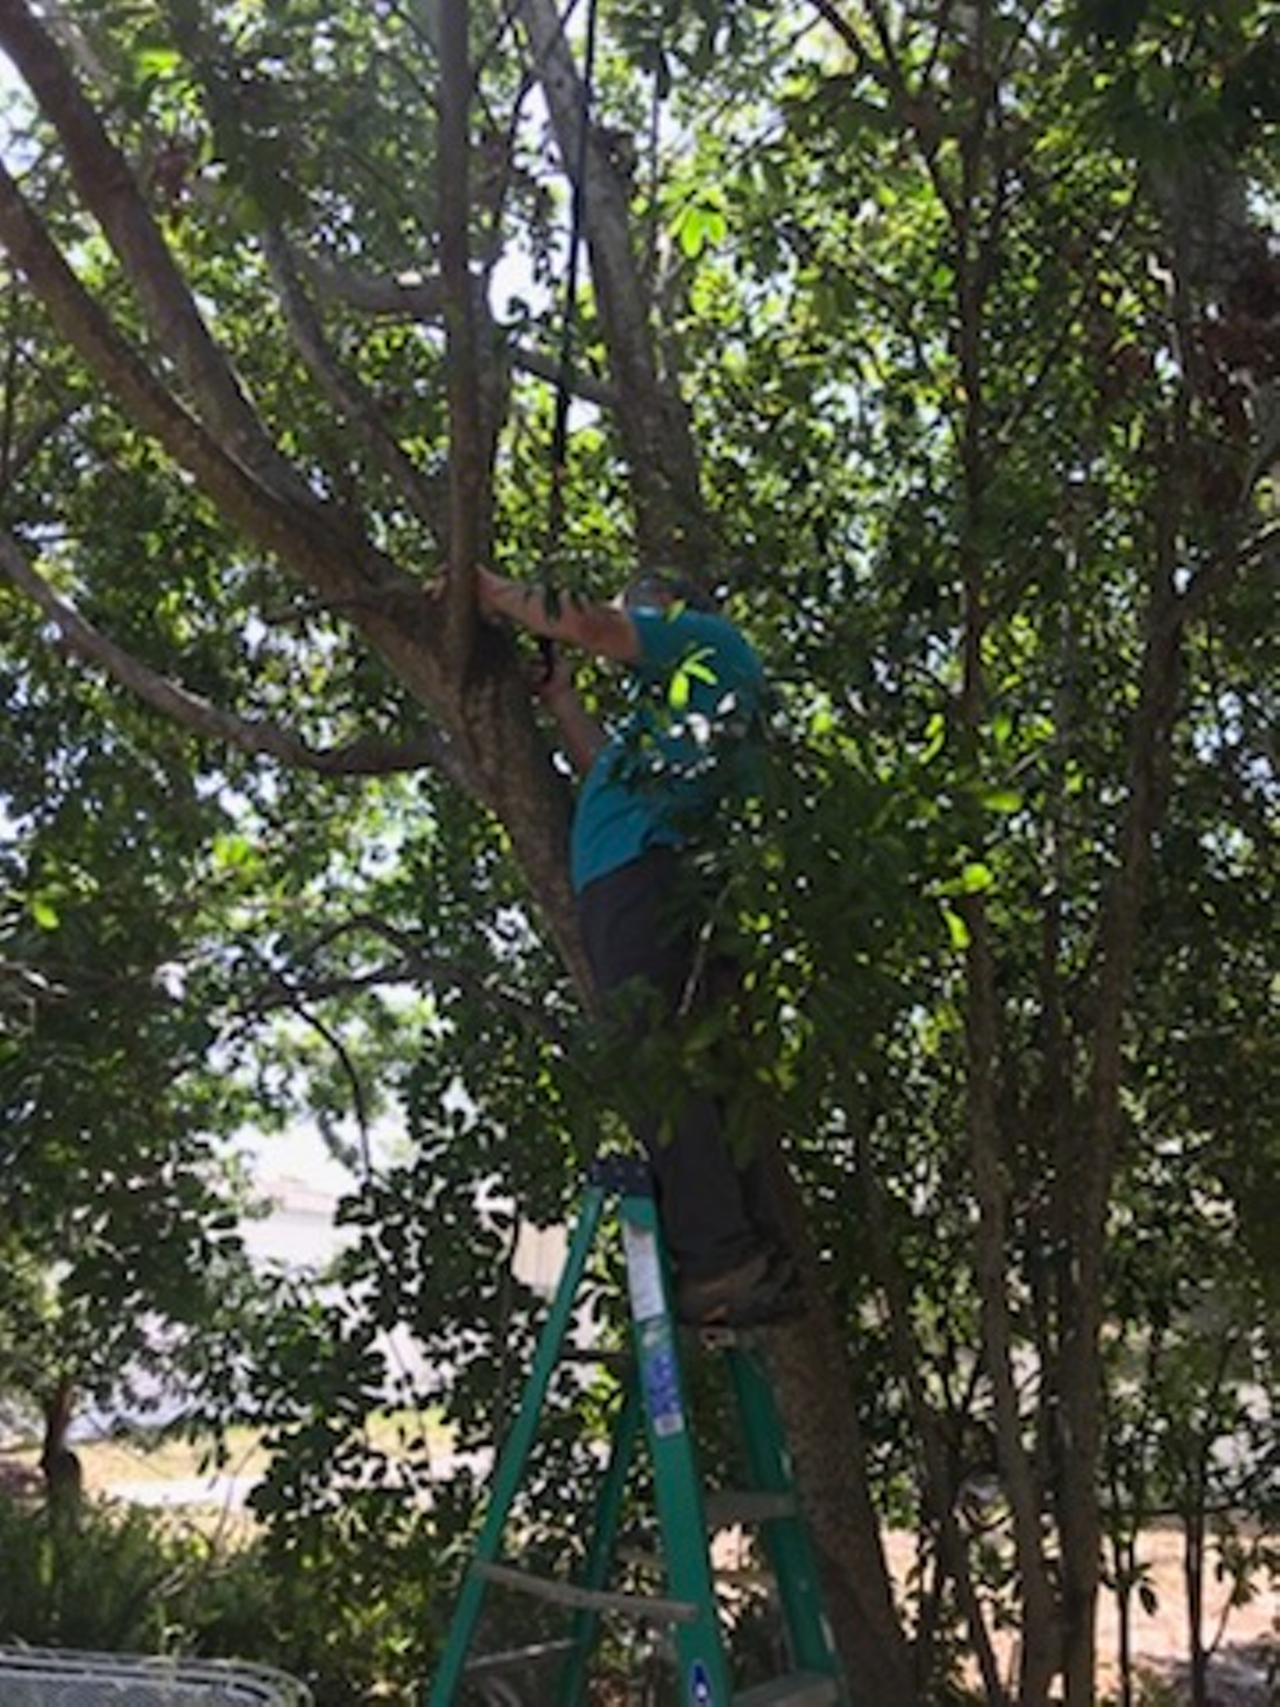 The peacock took to the trees. Suncoast Animal League did, too — albeit less gracefully.